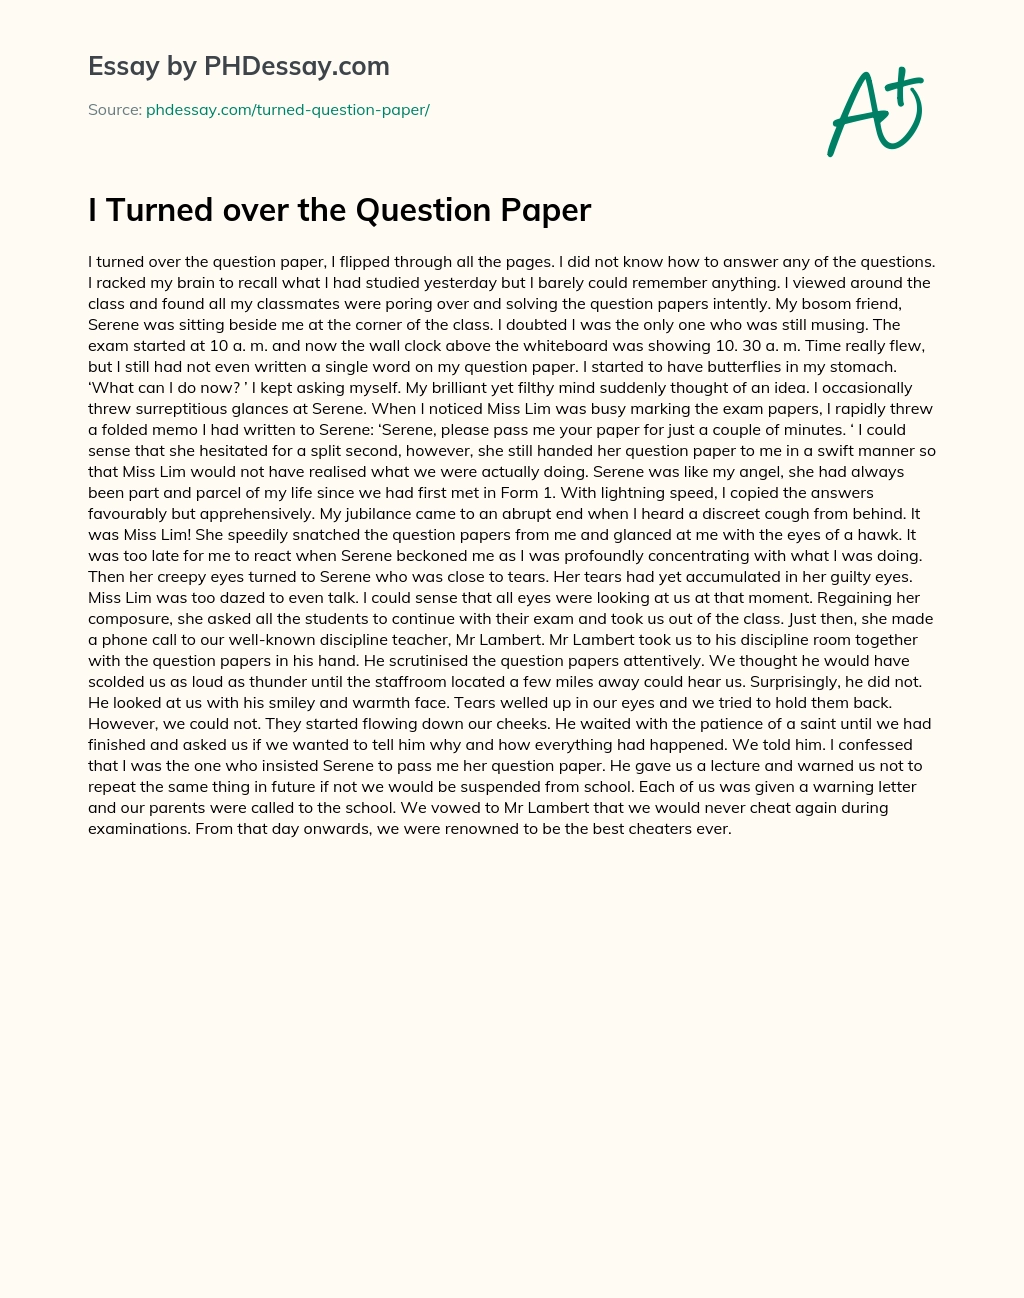 I Turned over the Question Paper essay